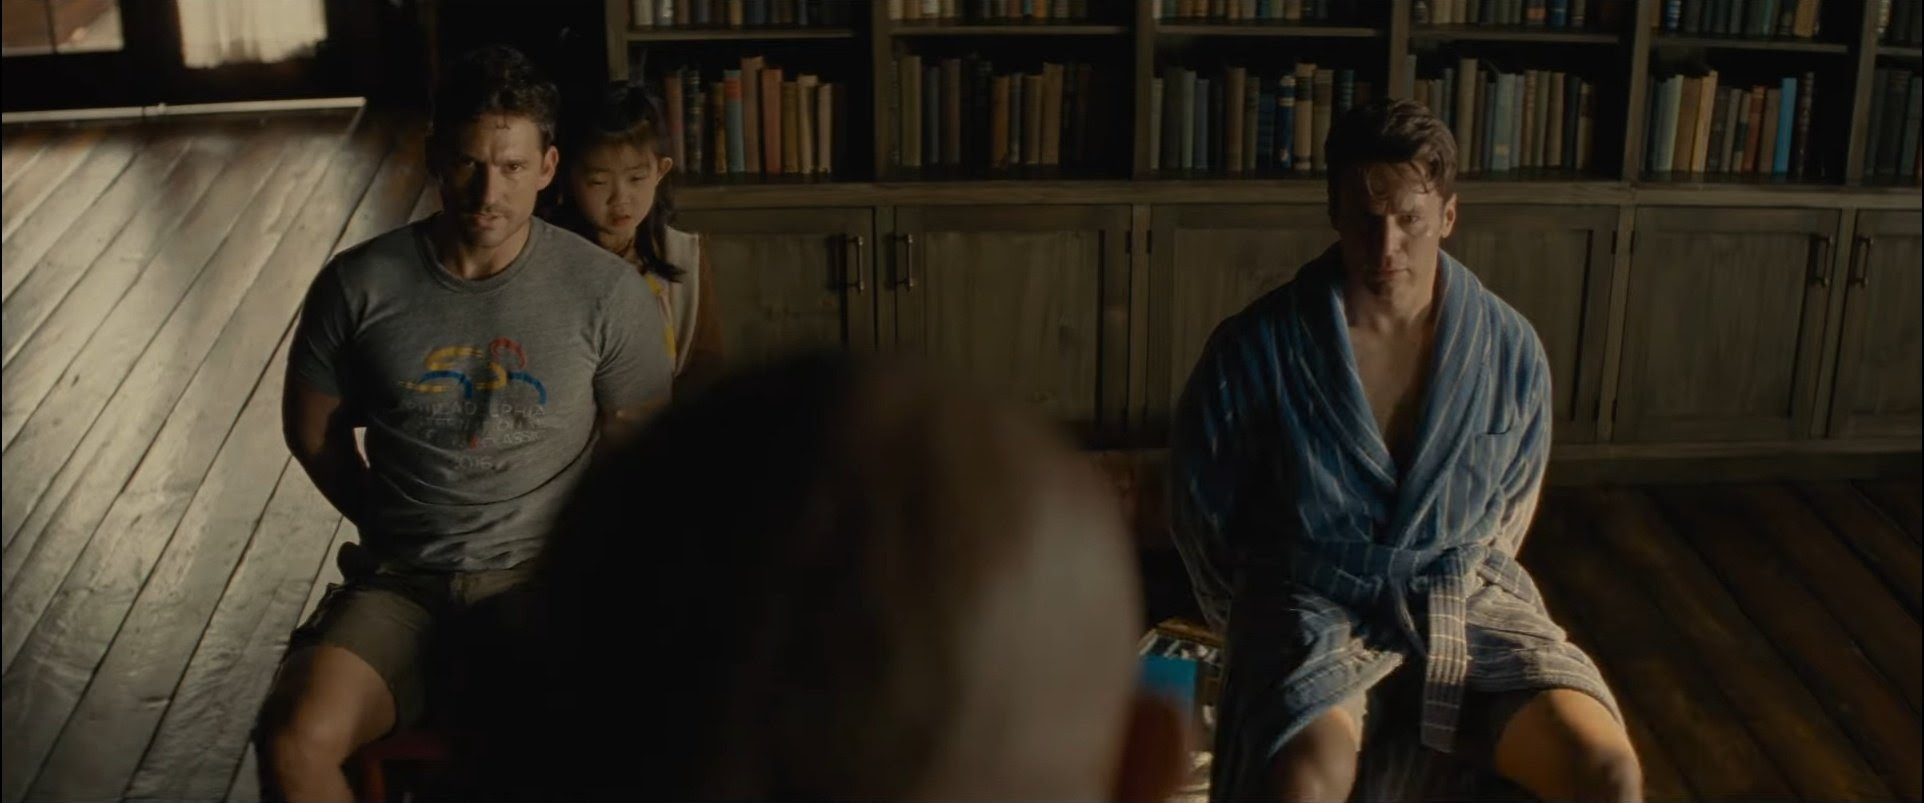 Knock At The Cabin Review Shyamalan S New Film Recreates Annoyance Of